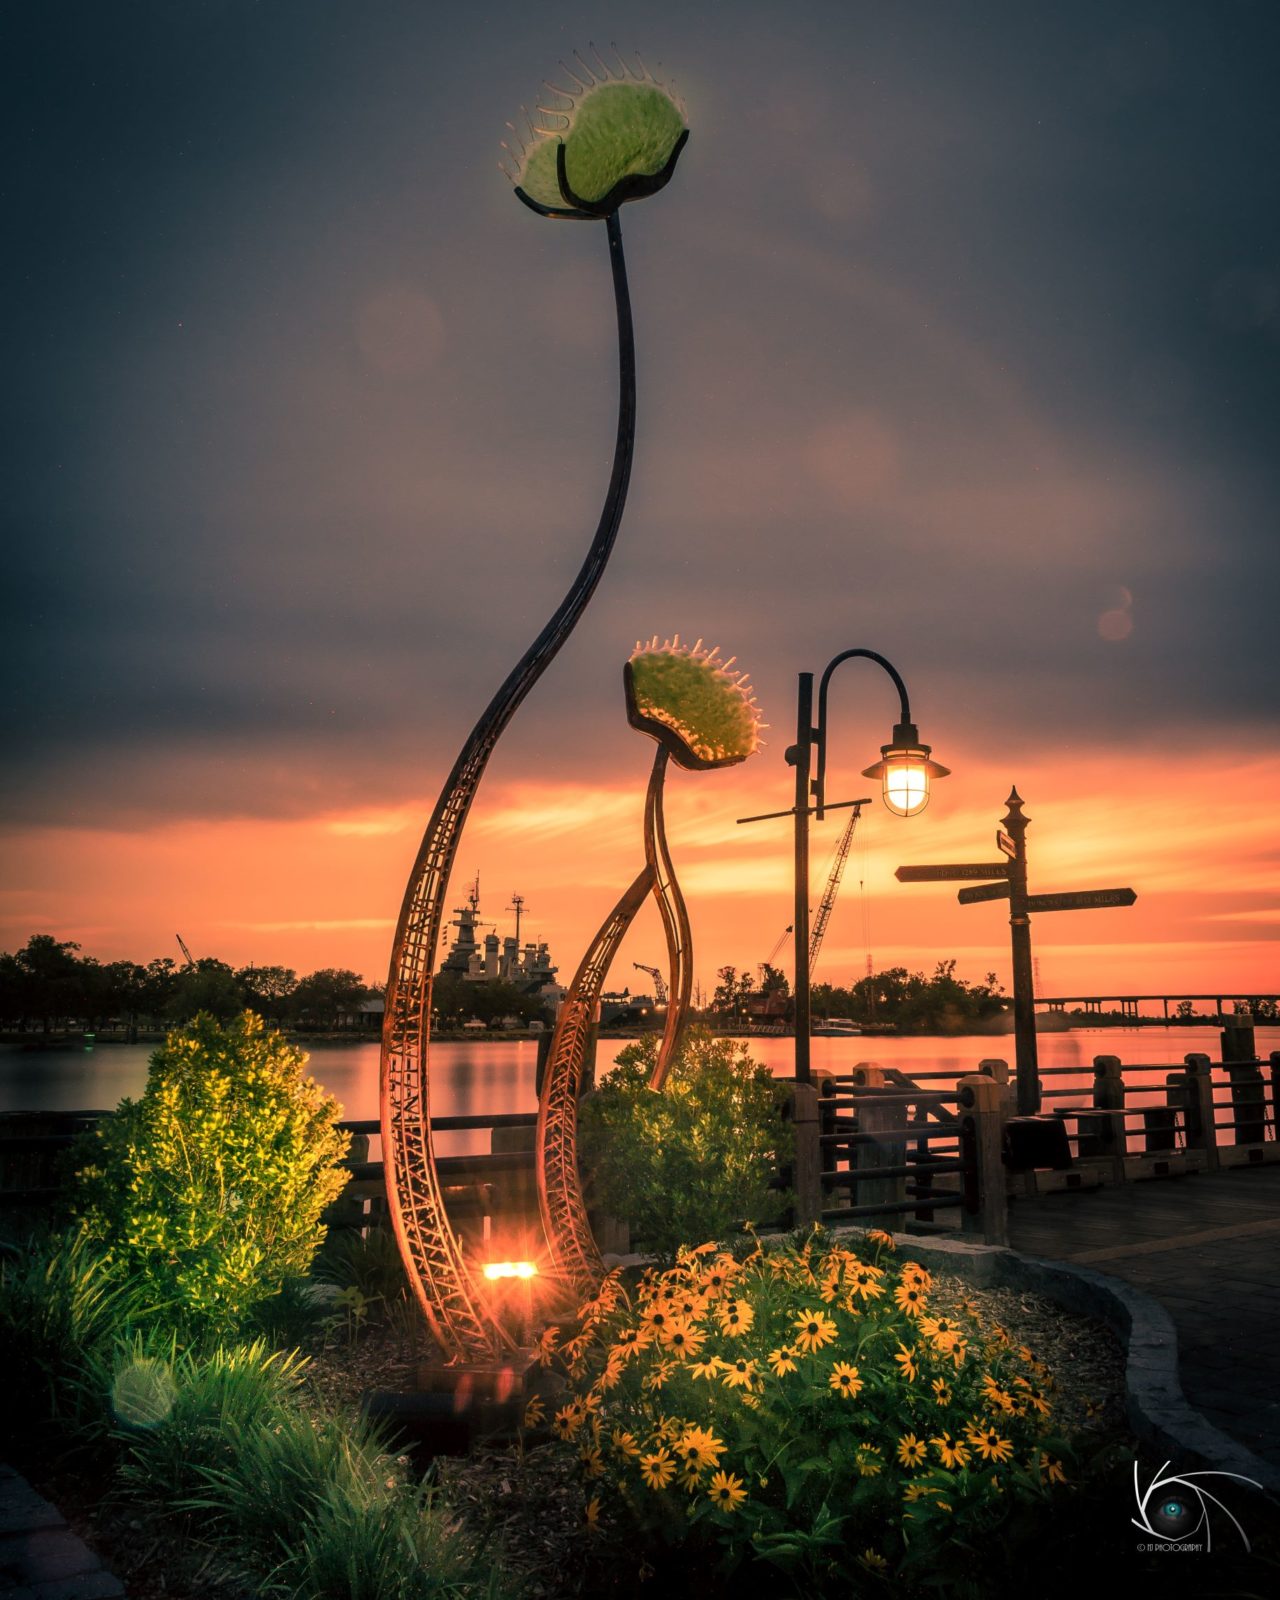 "Southern Hospitality" is a Venus flytrap sculpture on the Cape Fear Riverwalk in downtown WIlmington. ©NJ PHOTOGRAPHY